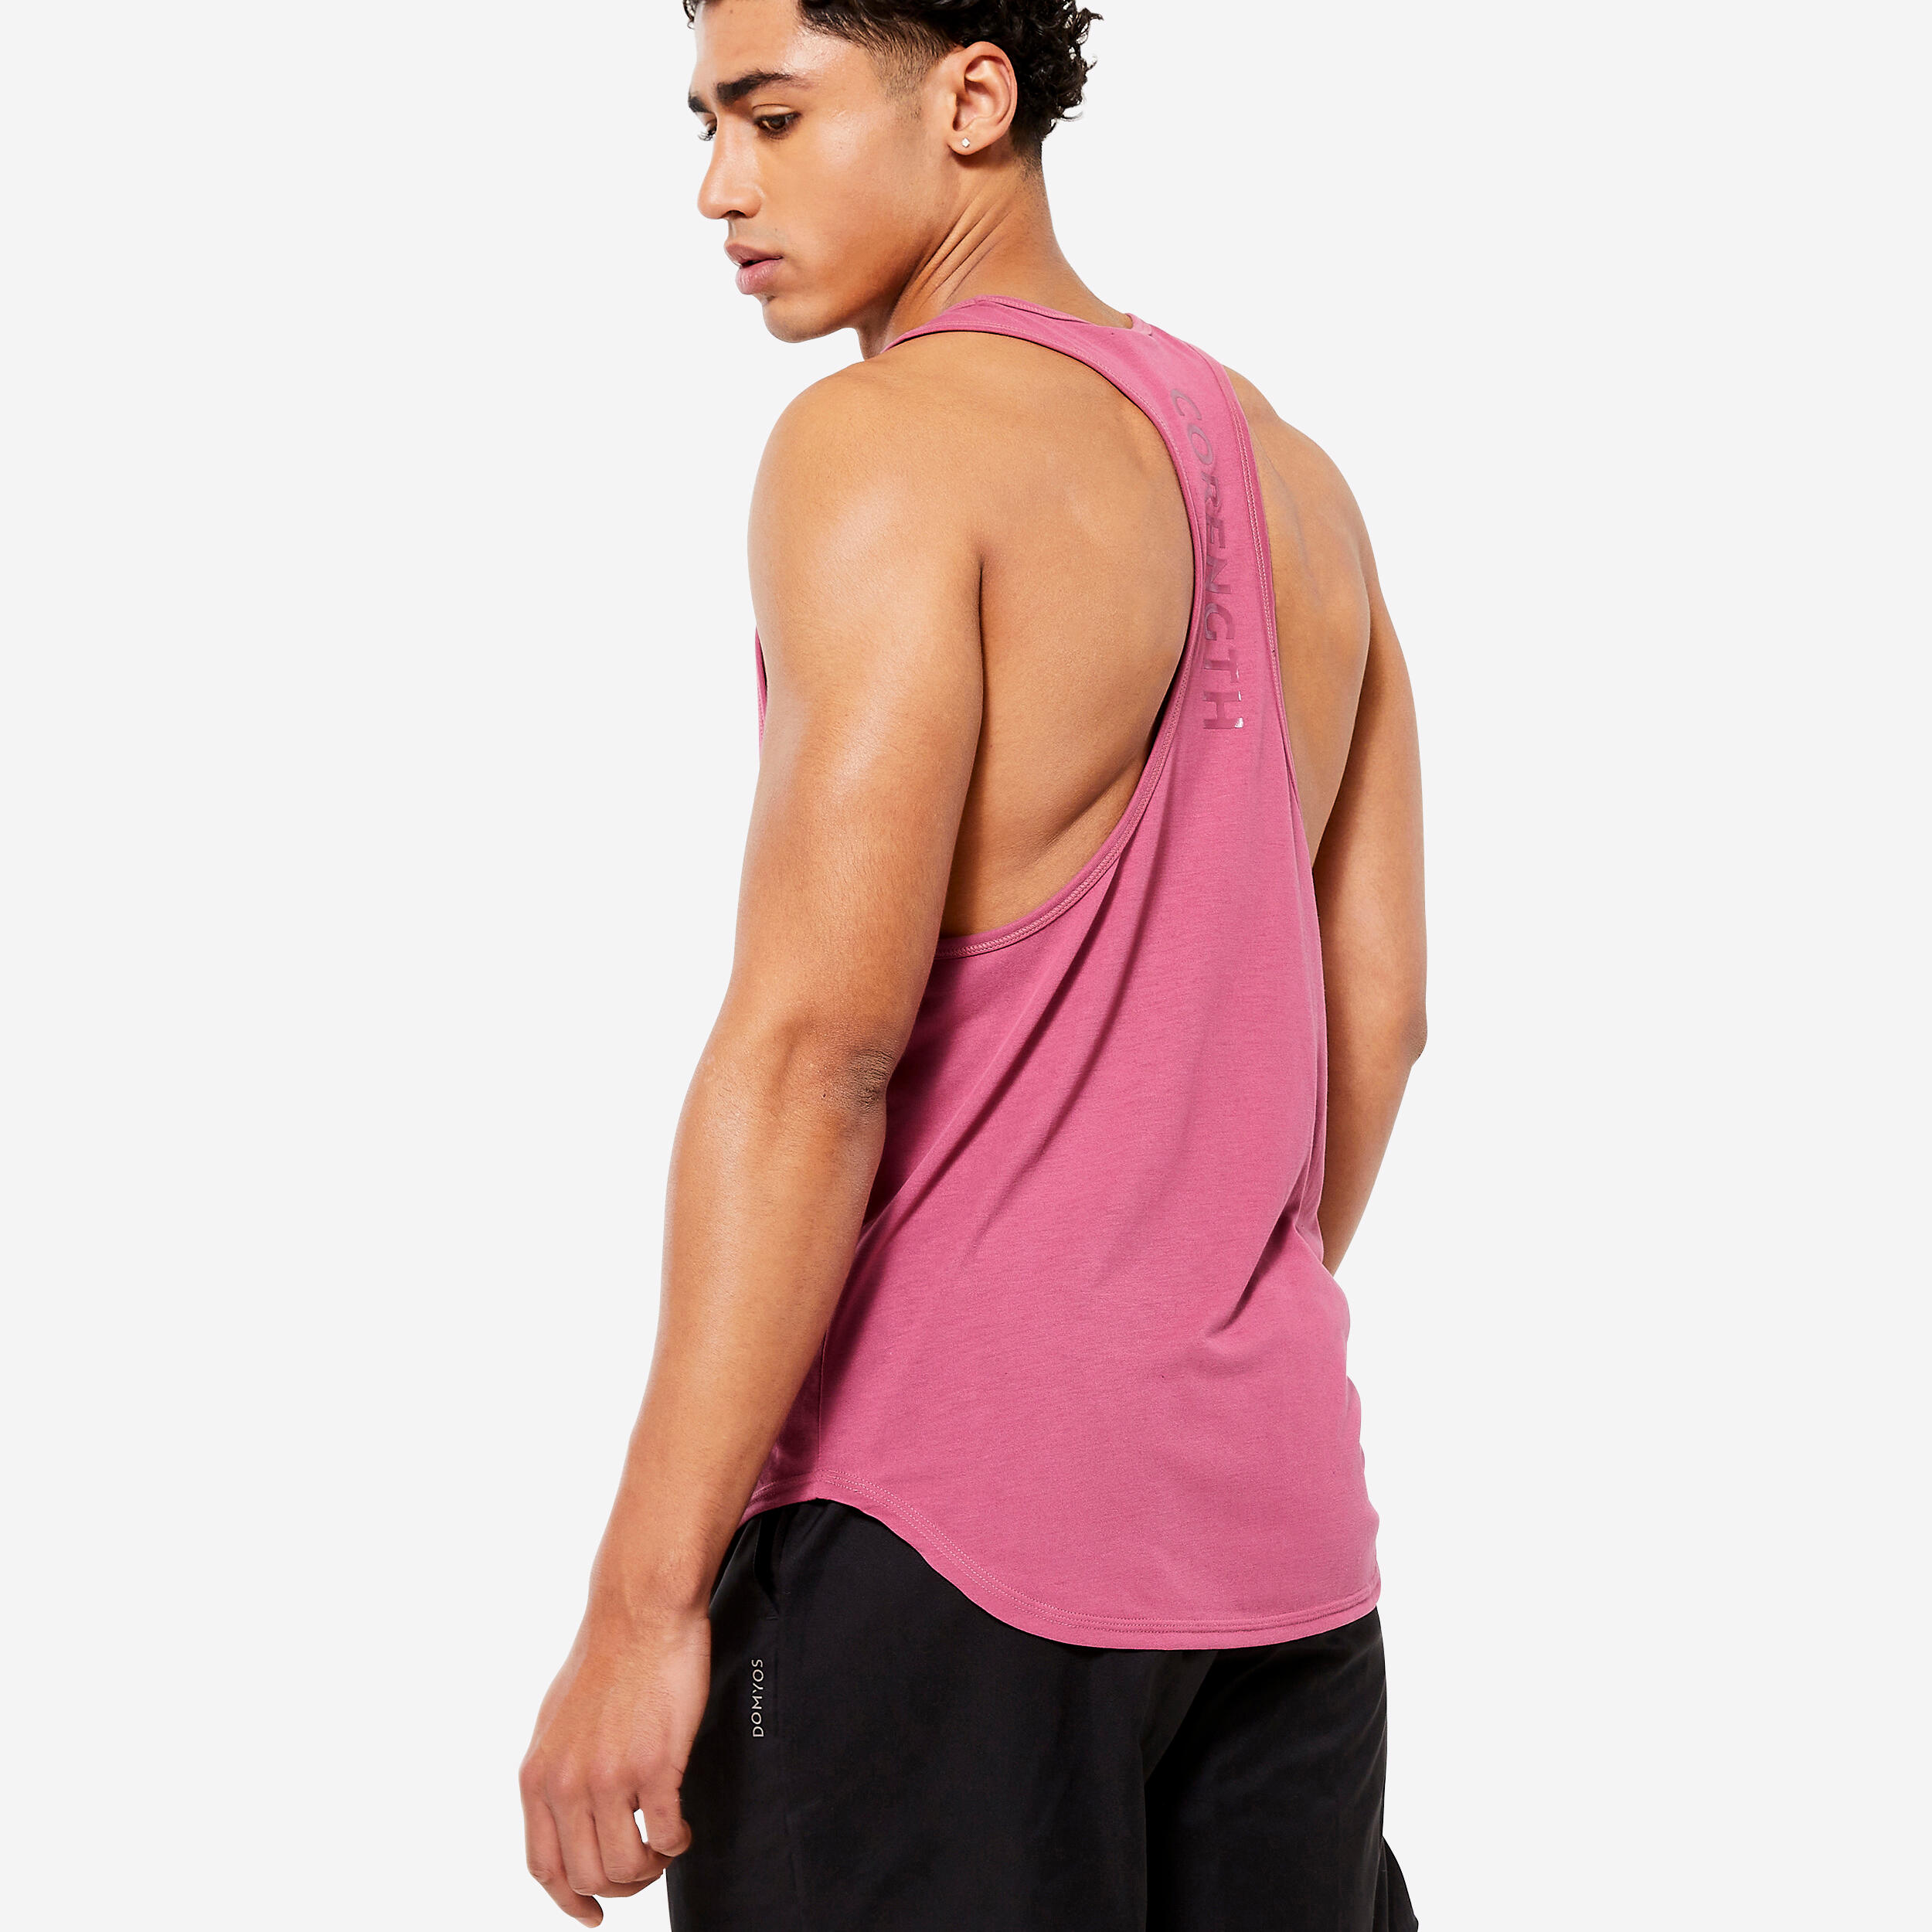 Men's Breathable Weight Training Performance Stringer Tank Top - Pink 5/6